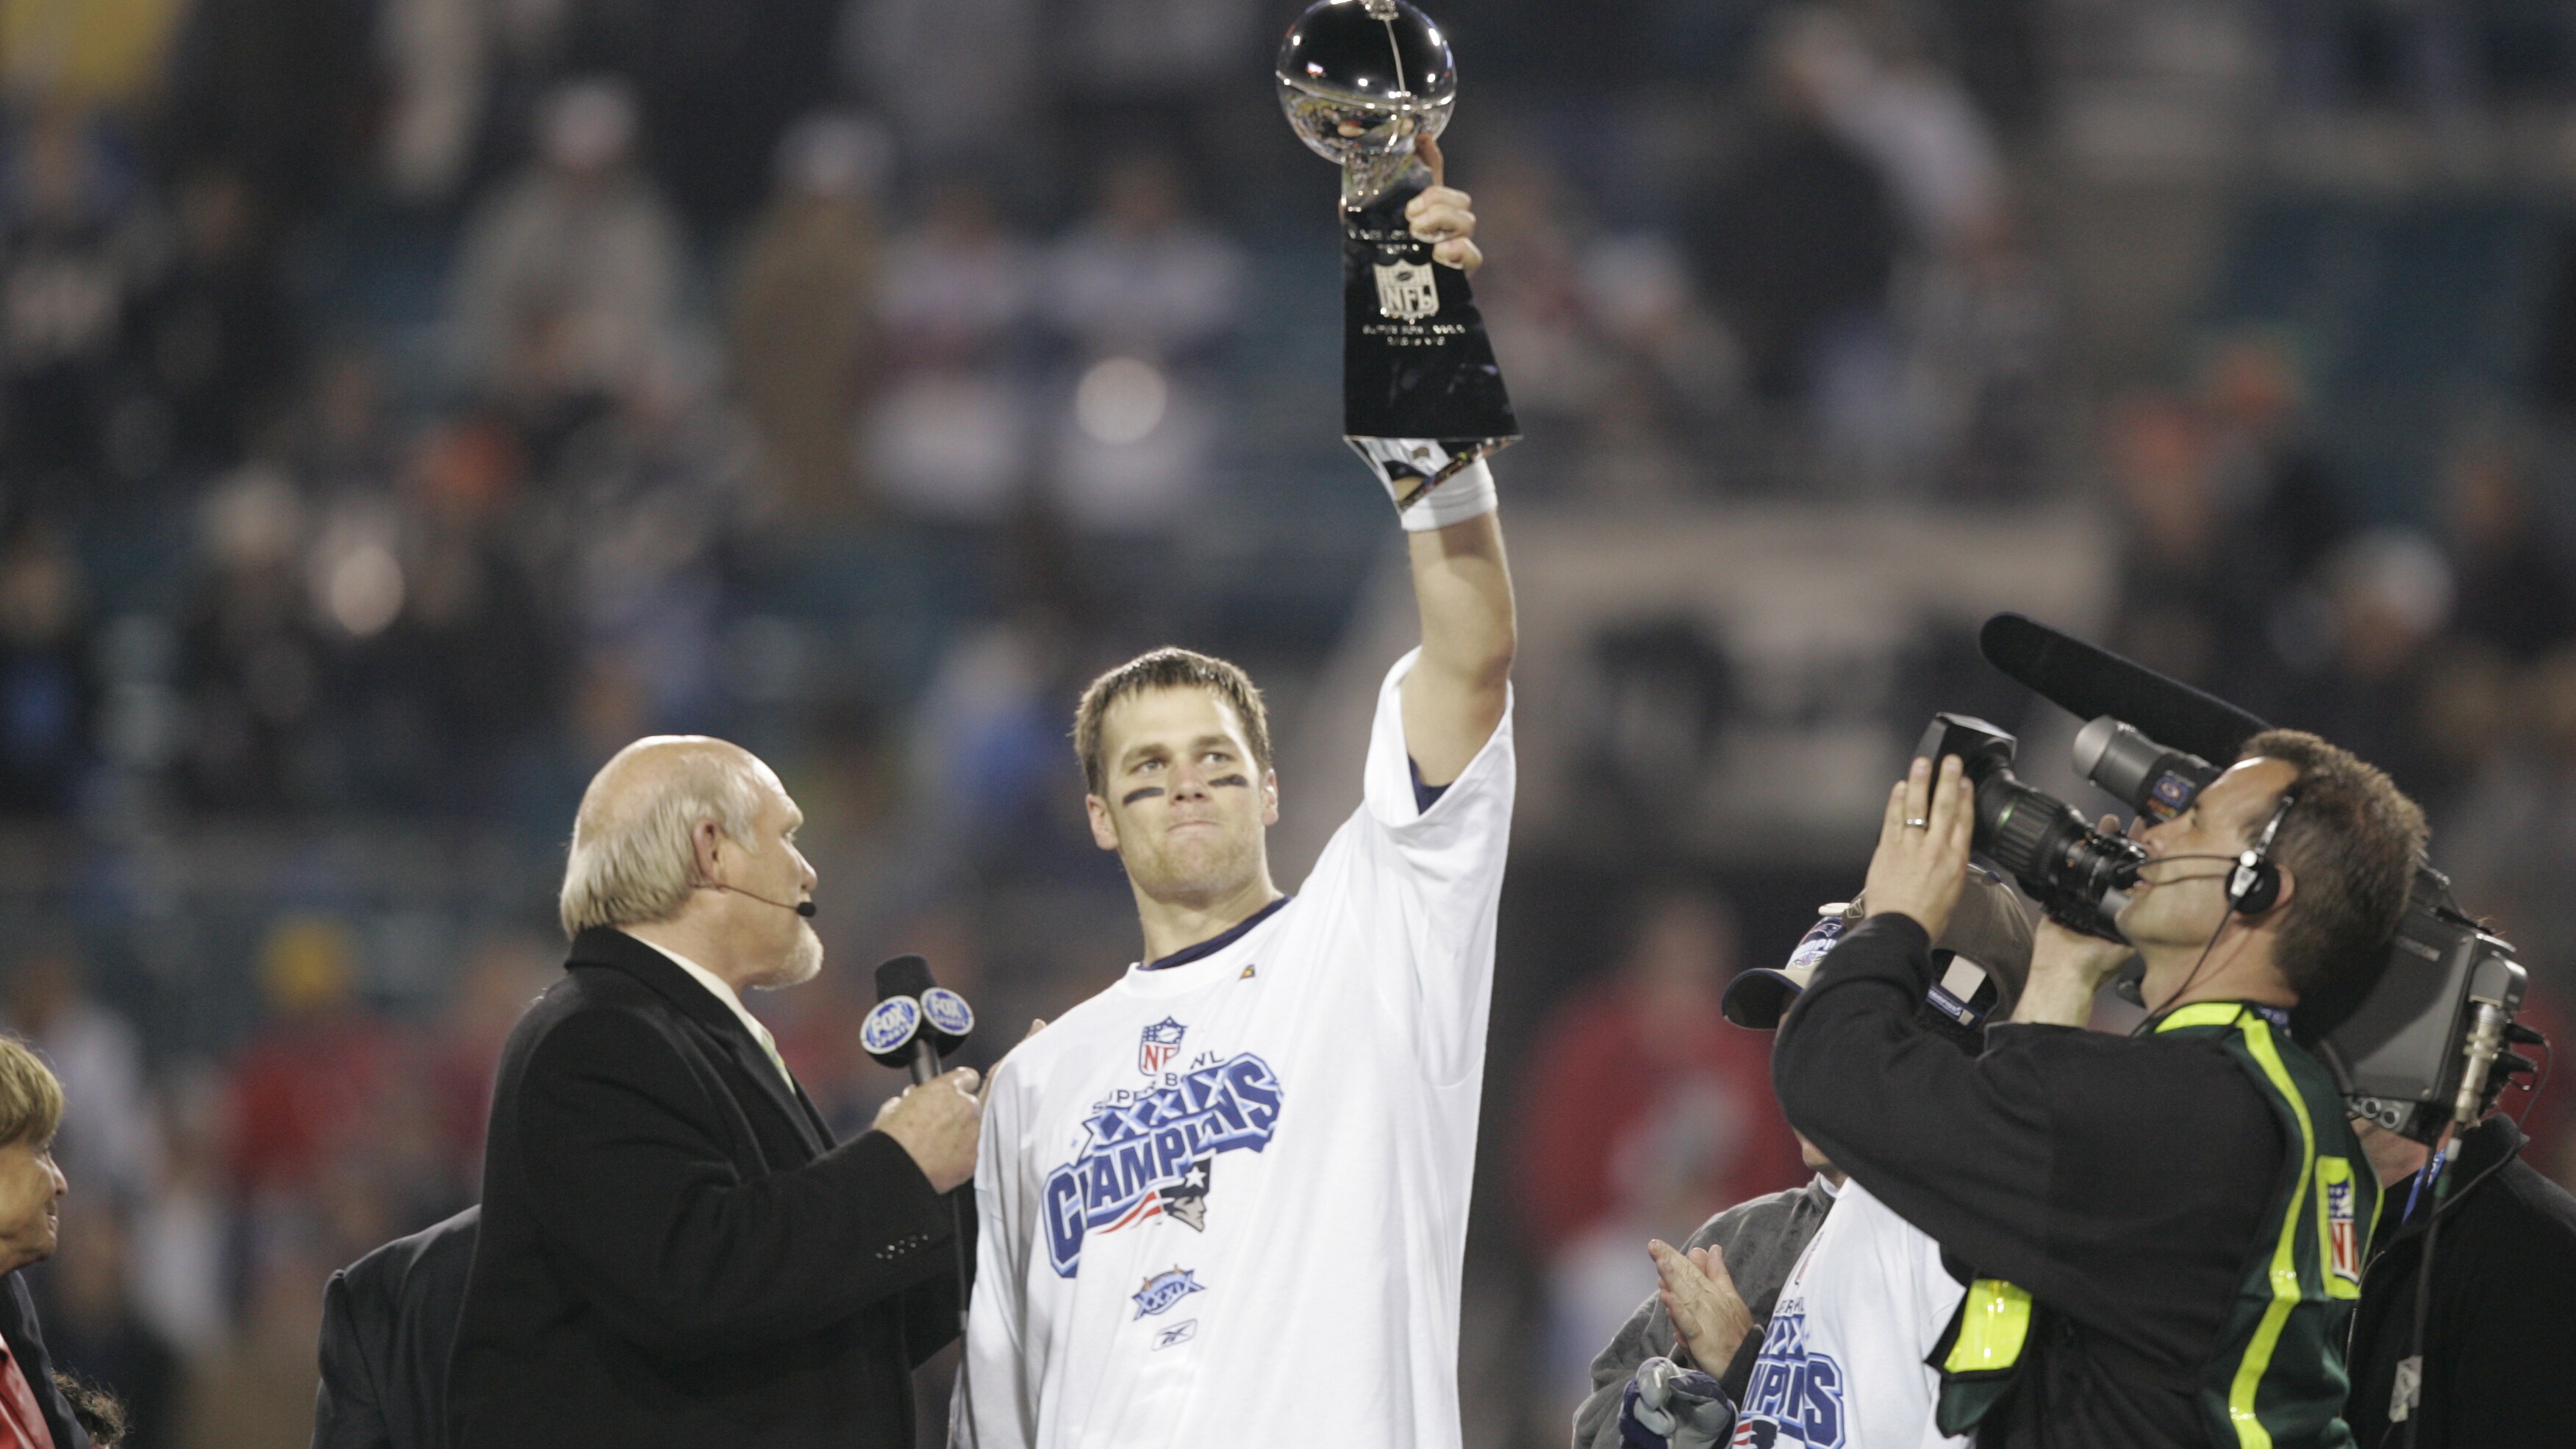 JACKSONVILLE, FL - FEBRUARY 6, 2005: Tom Brady of the New England Patriots holds up the Lombardi Trophy after winning Super Bowl XXXIX at ALLTEL Stadium (Photo by Scott Clarke / ESPN Images)